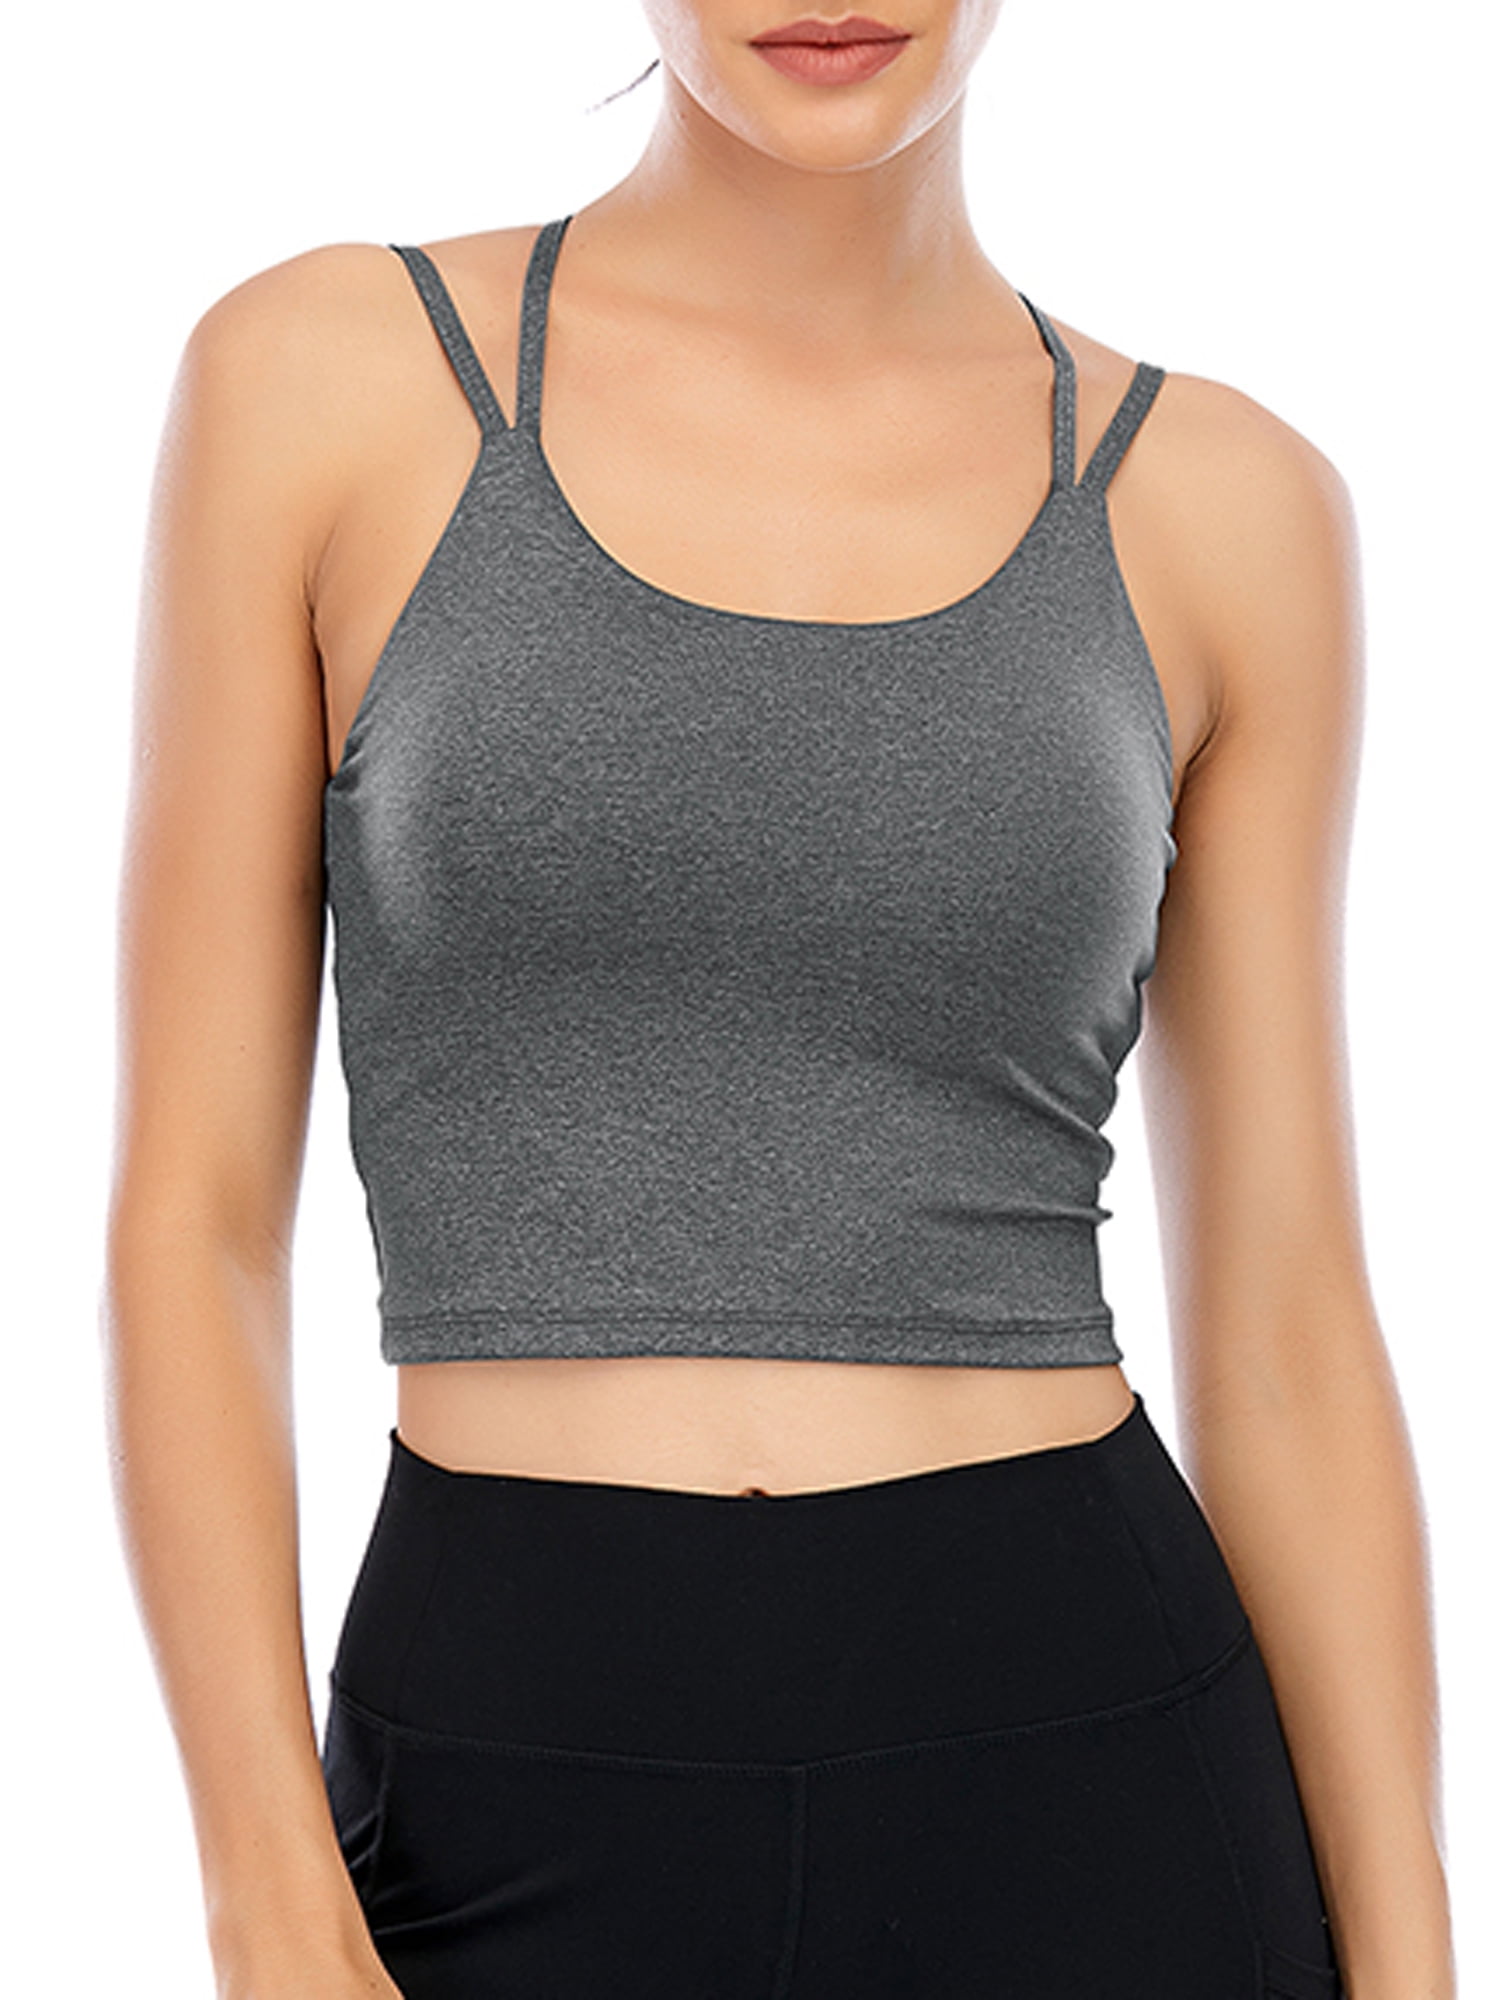 Women Bra Seamless Stretch Padded Removable Padded Sports Yoga Fitness Crop Tops 